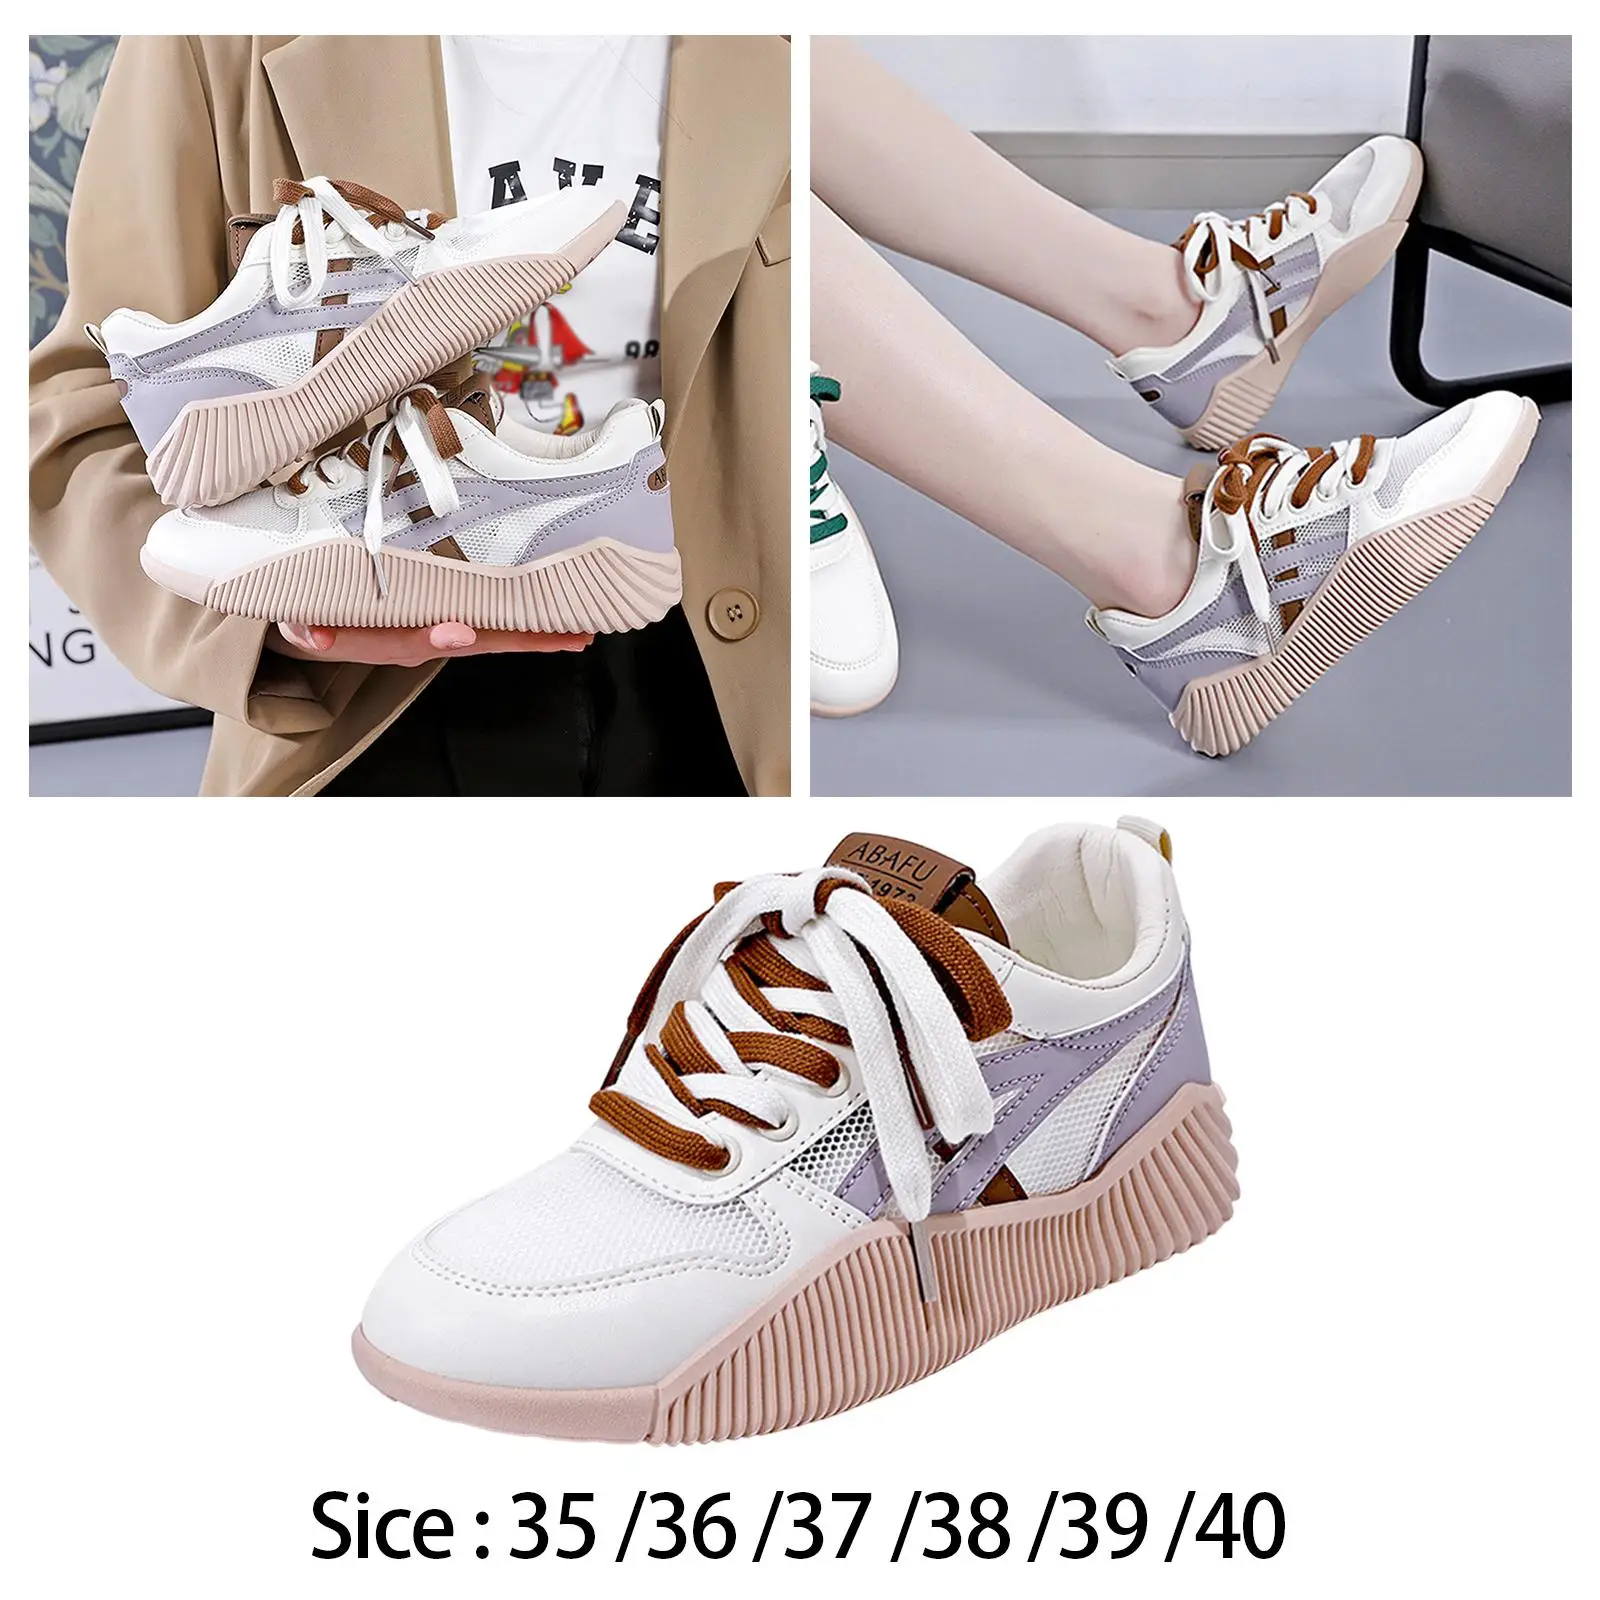 Women Platform Sneakers Comfortable Sports Shoes PU Upper Fashion Trainers